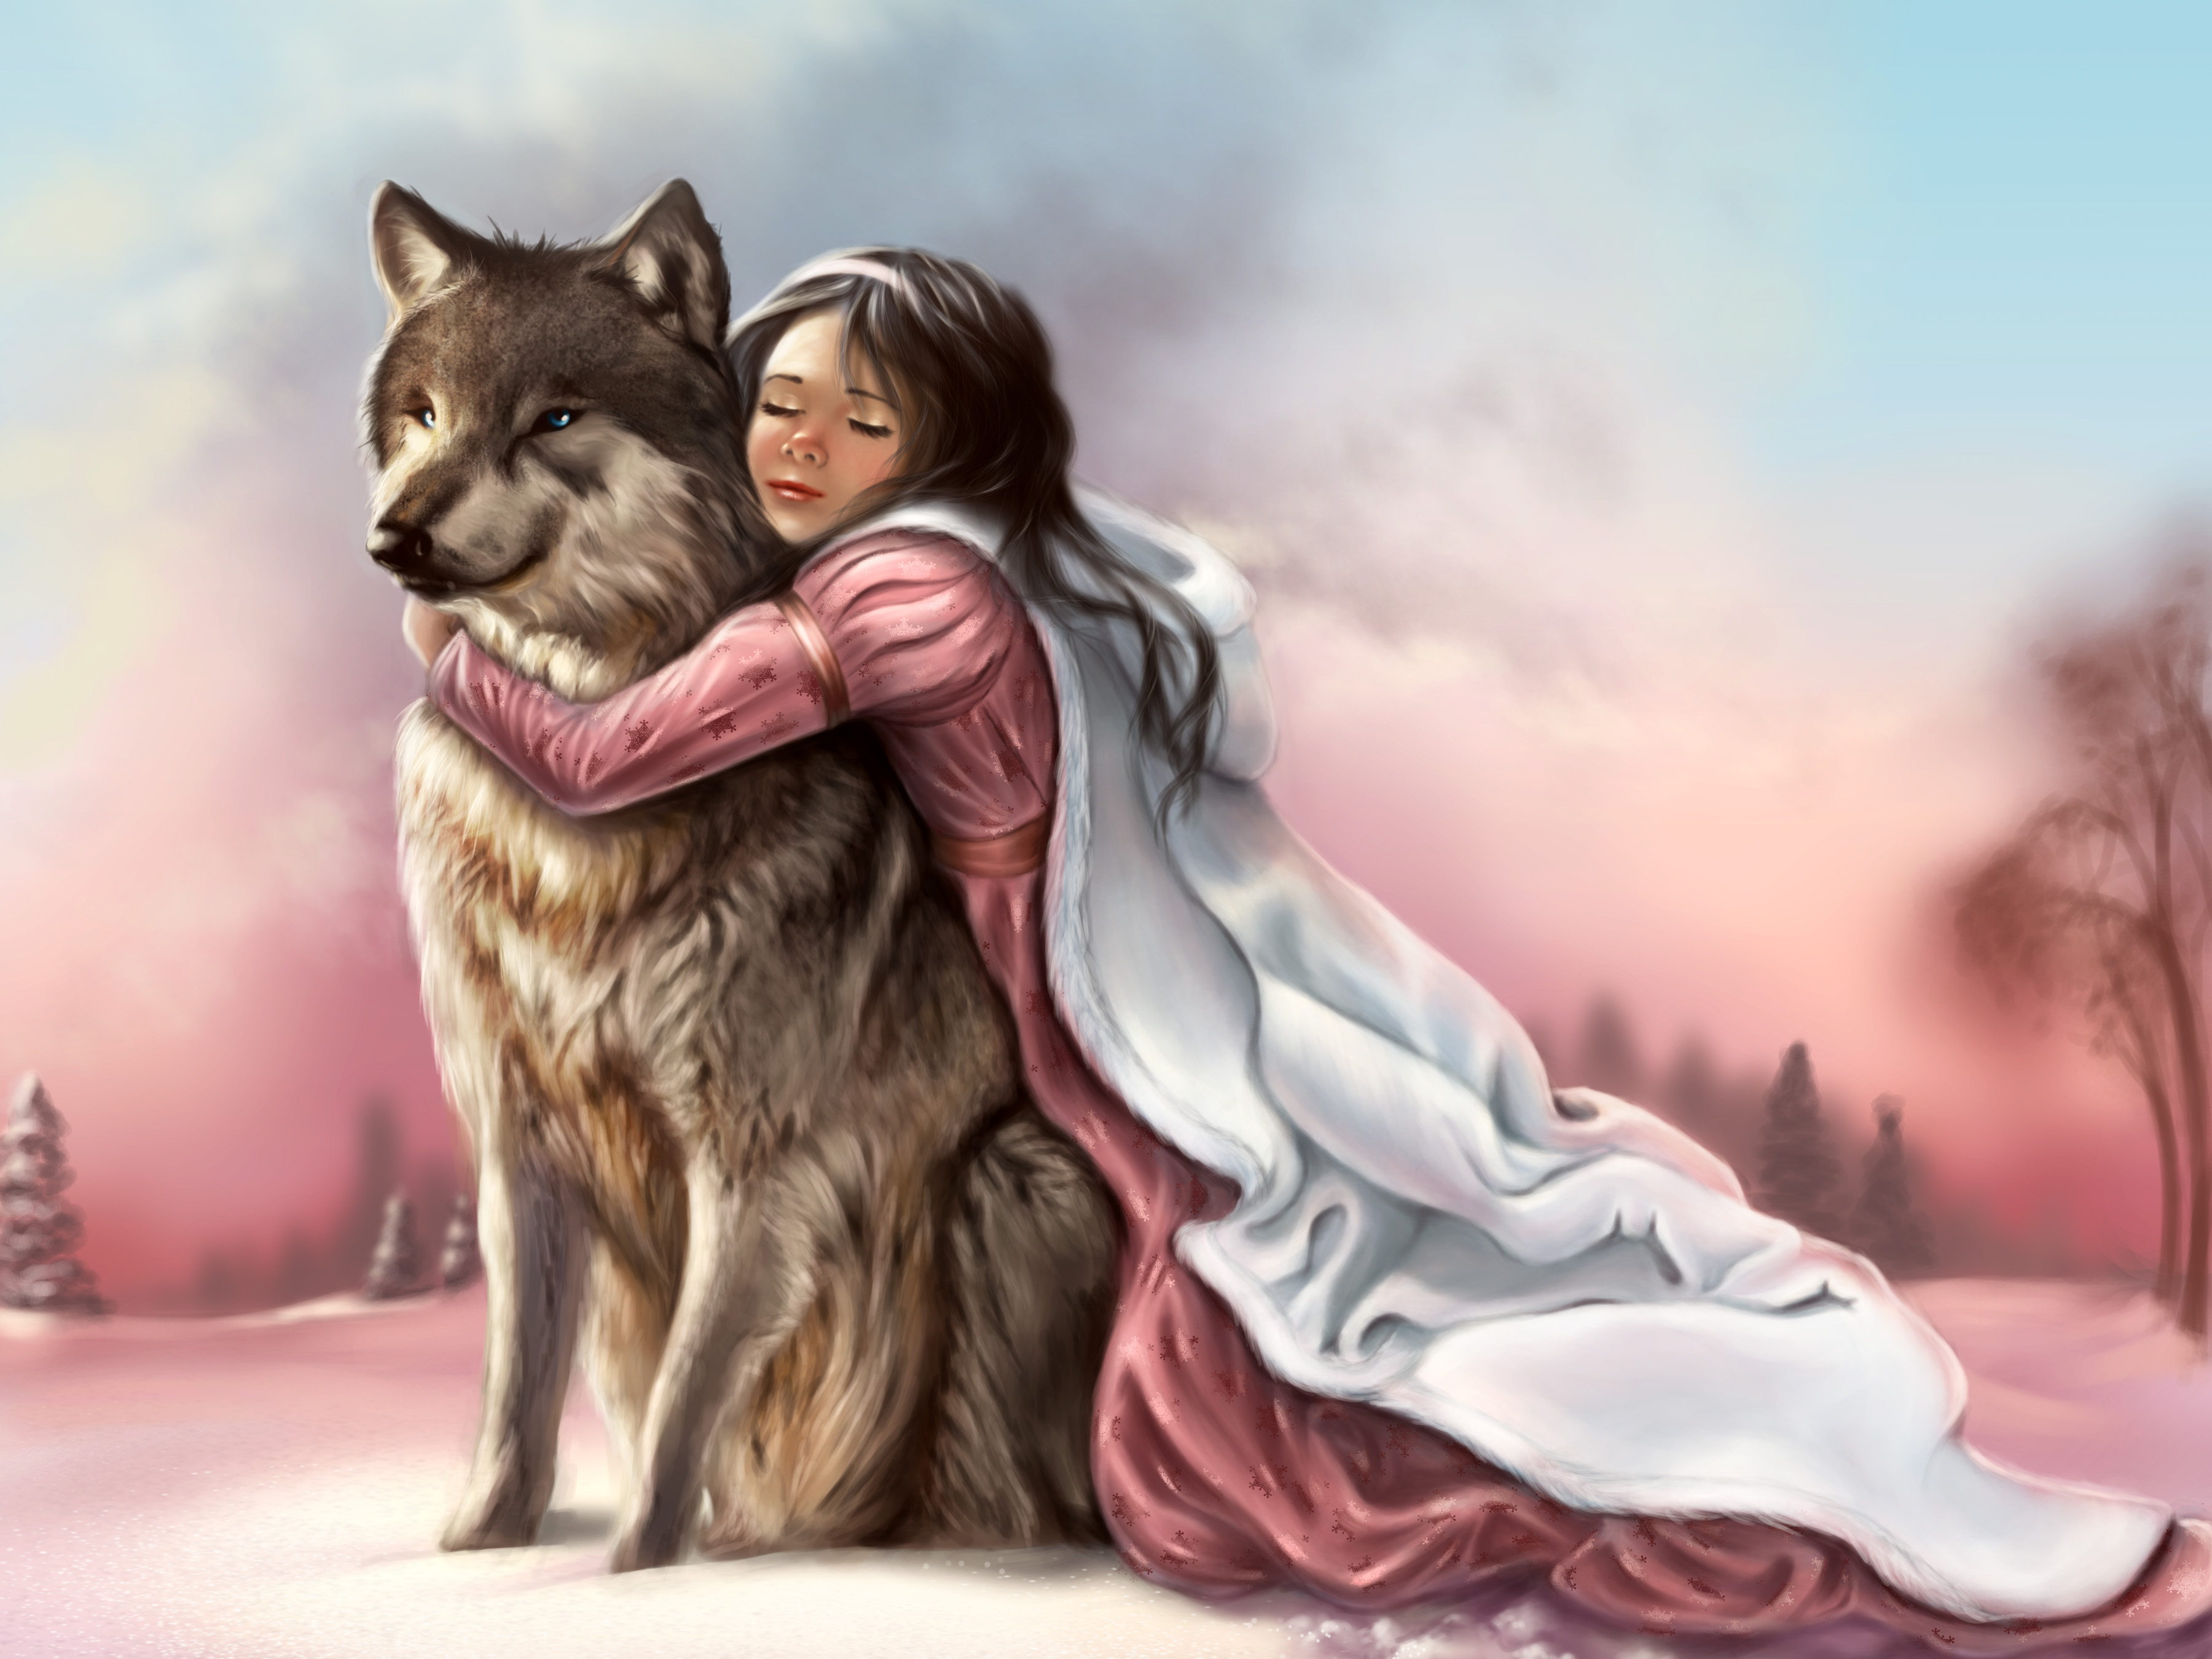 Little Girl and Wolf by Rachel Hatch